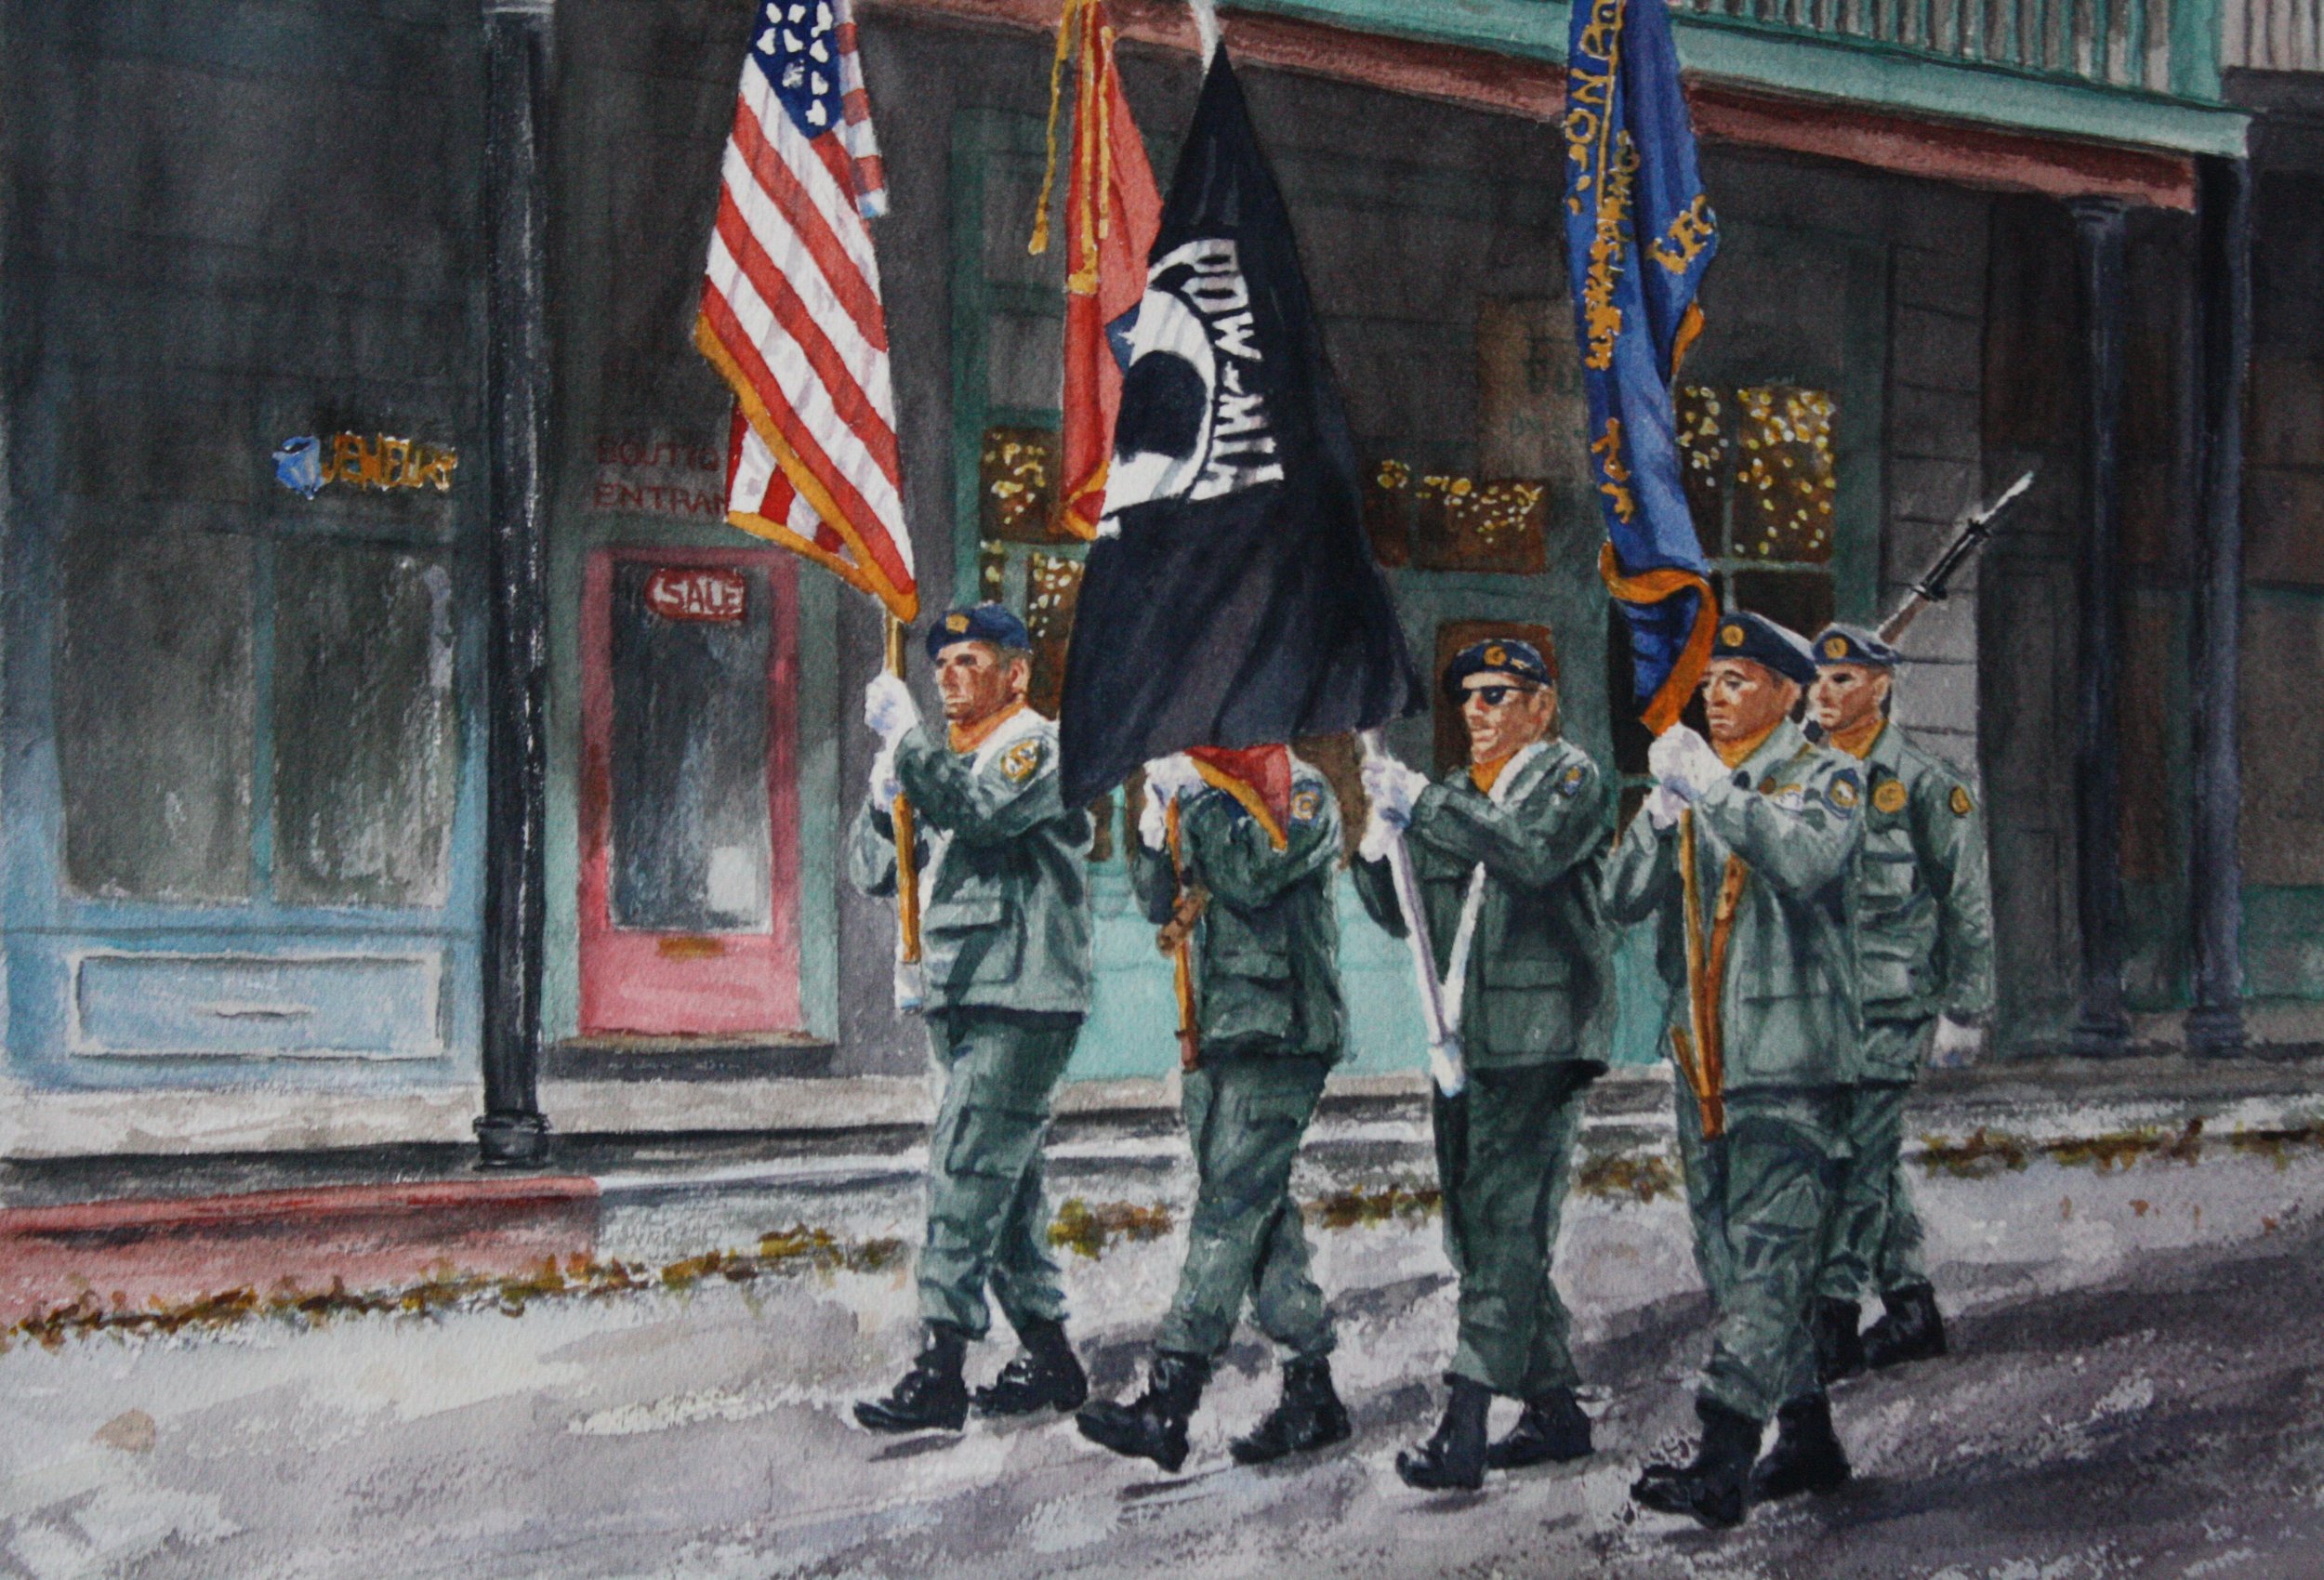    Veteran’s Day Parade  , 11” x 14”, watercolor on paper 